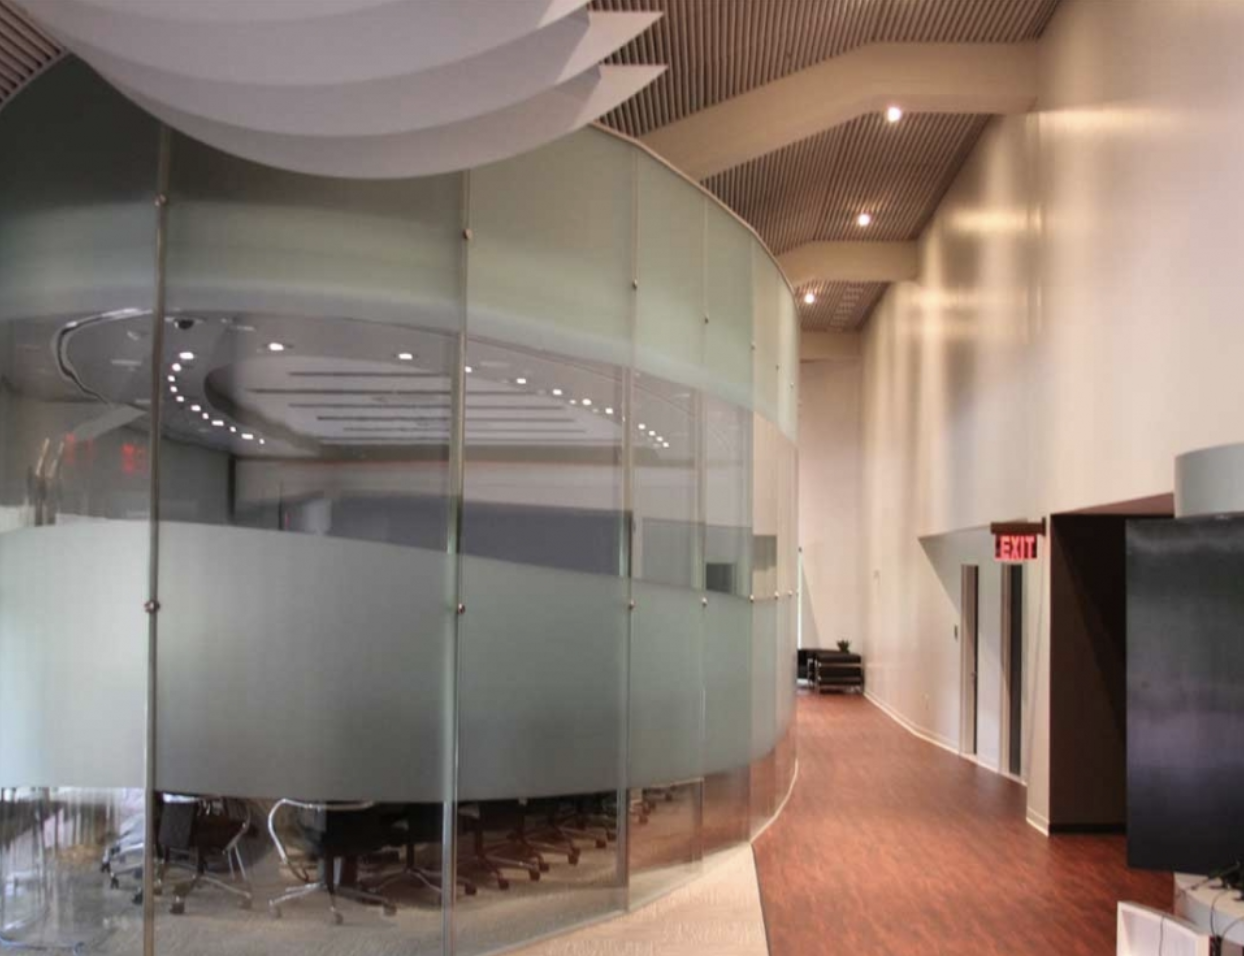 6 Reasons to Include Tempered Glass Walls in Office Design